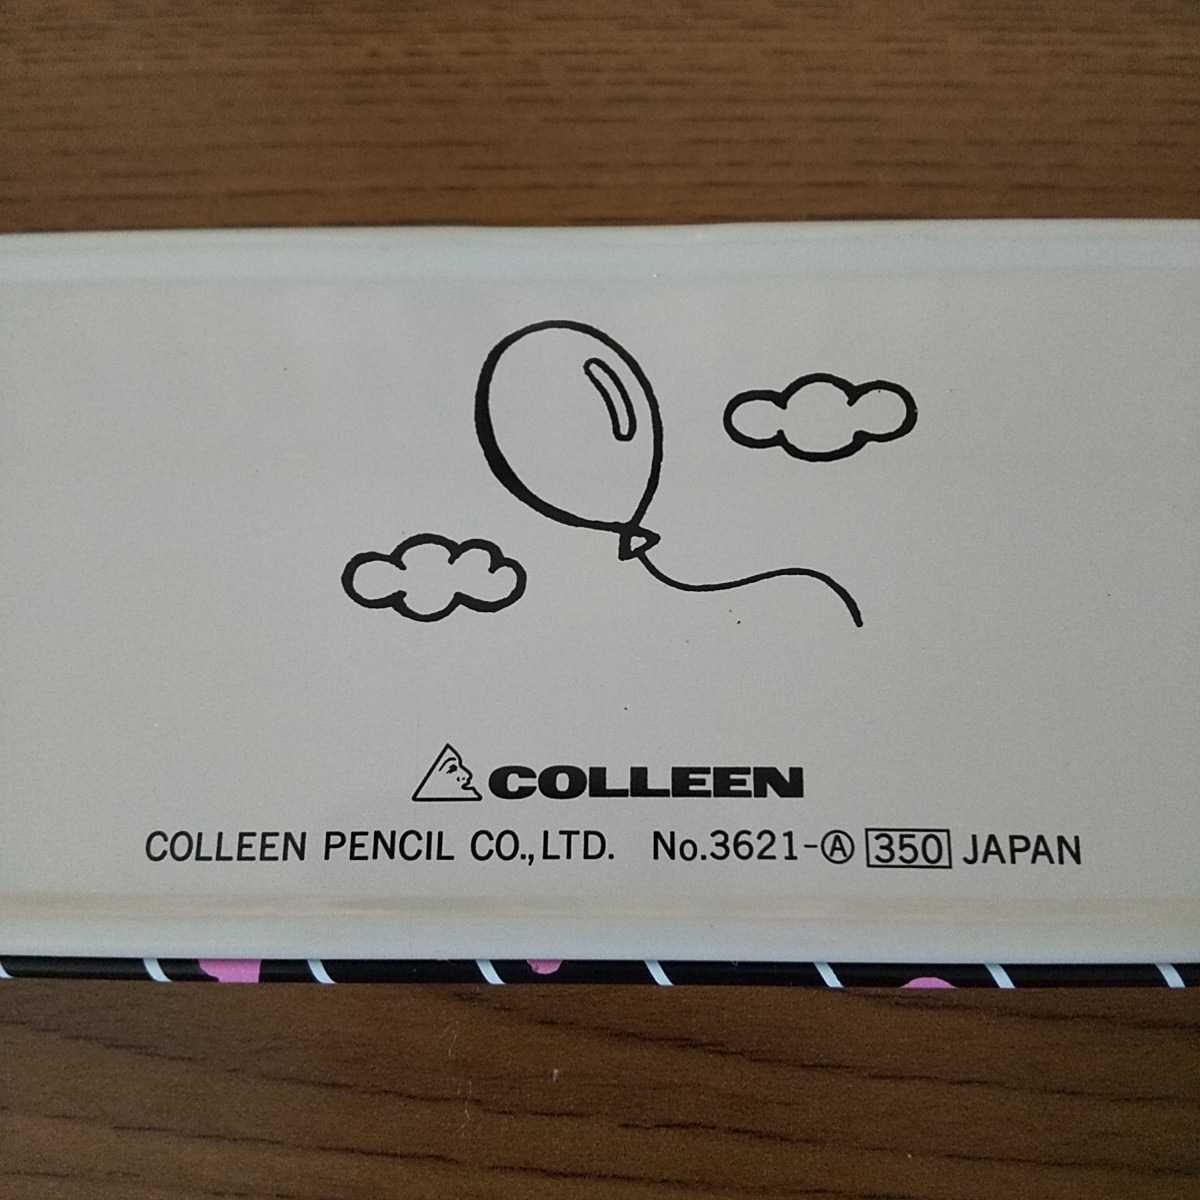  stationery shop stock goods *ko- Lynn [UP THE BALLOON] can pen case (a)*